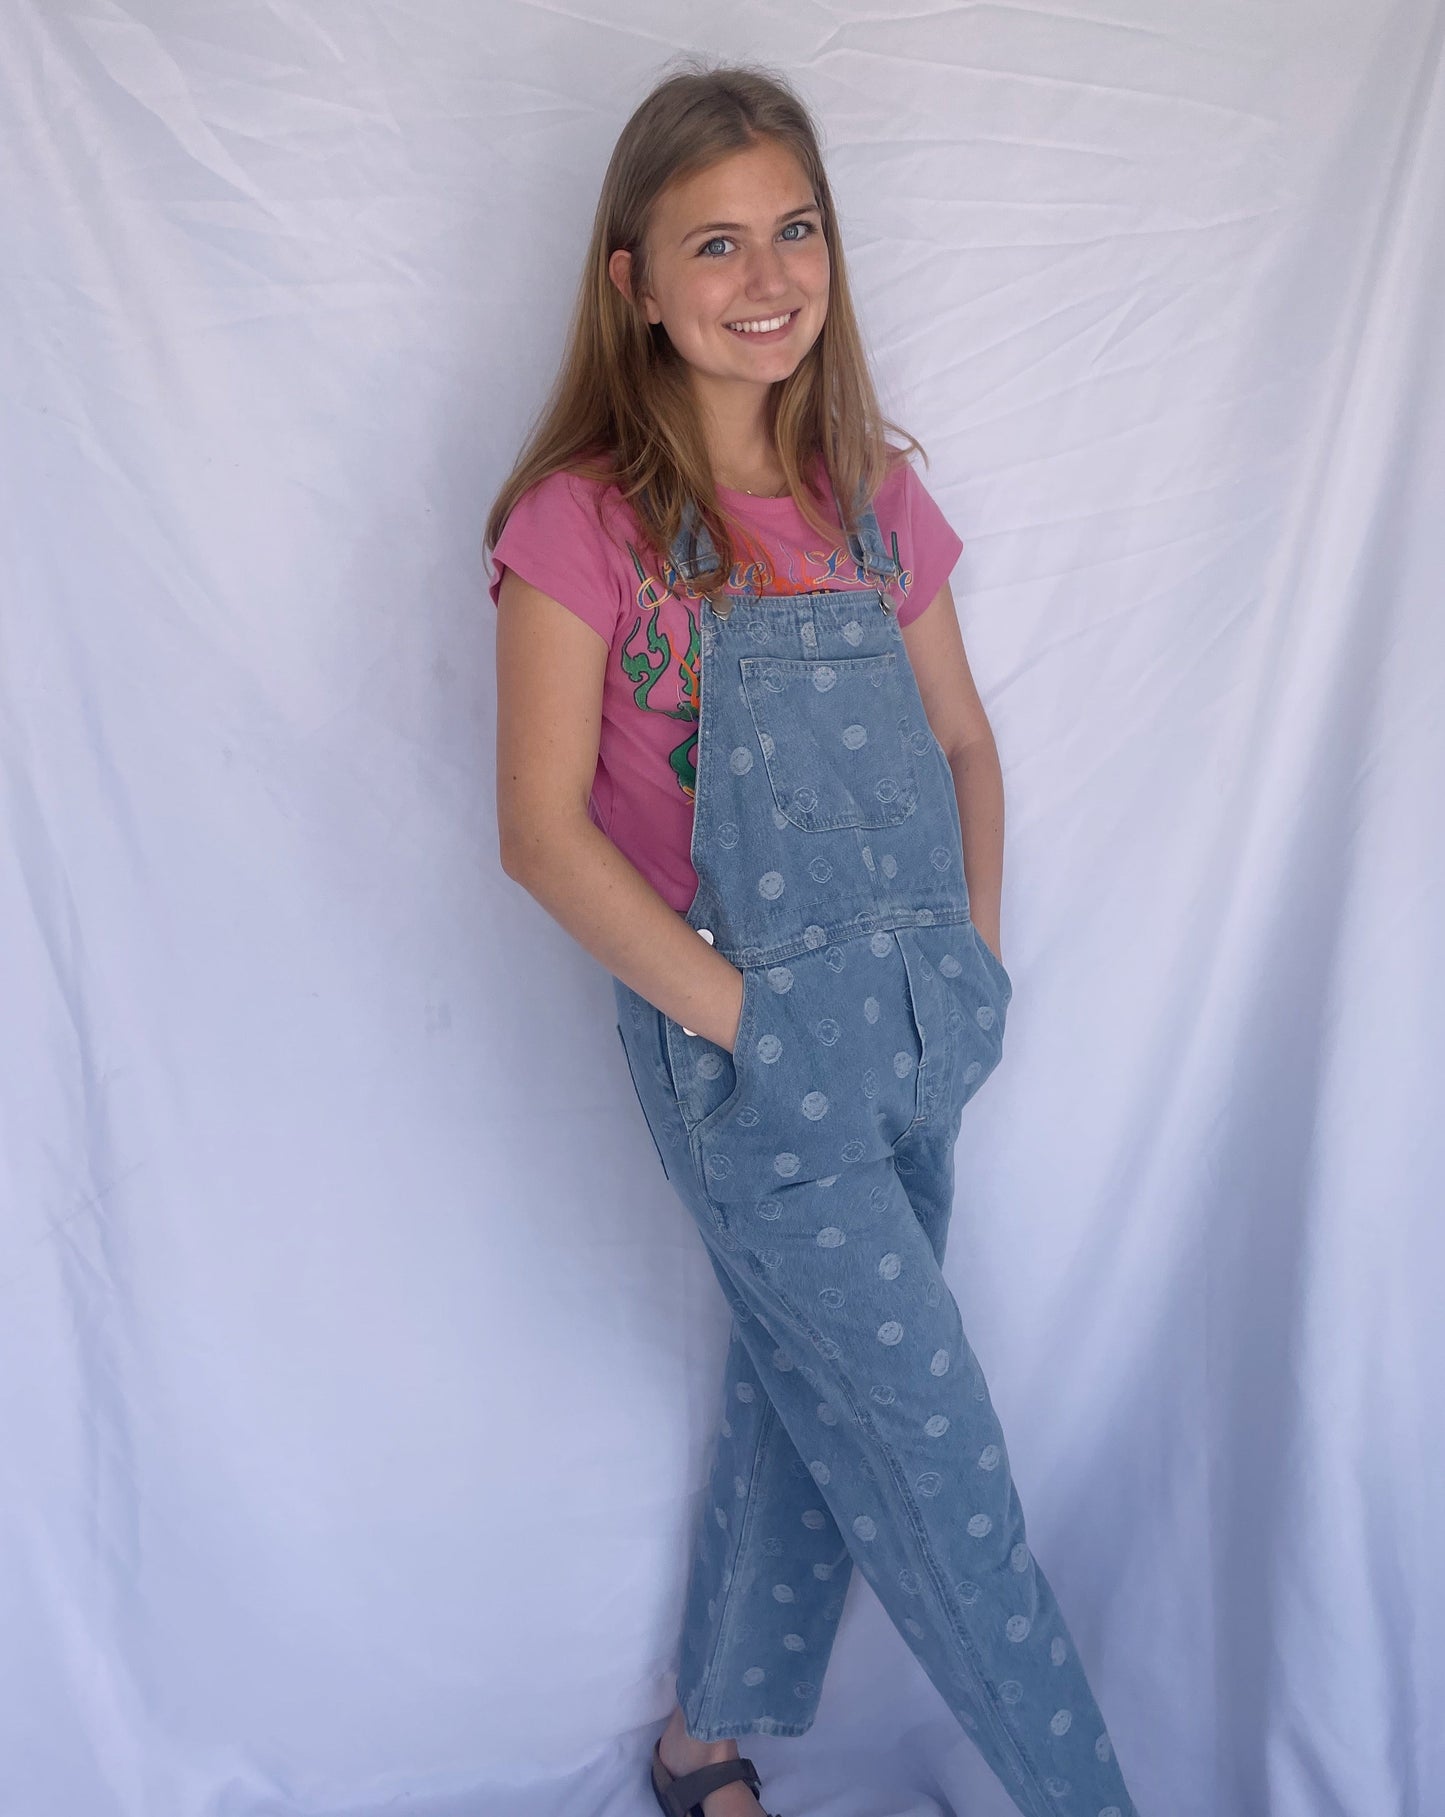 Share A Smile Overalls